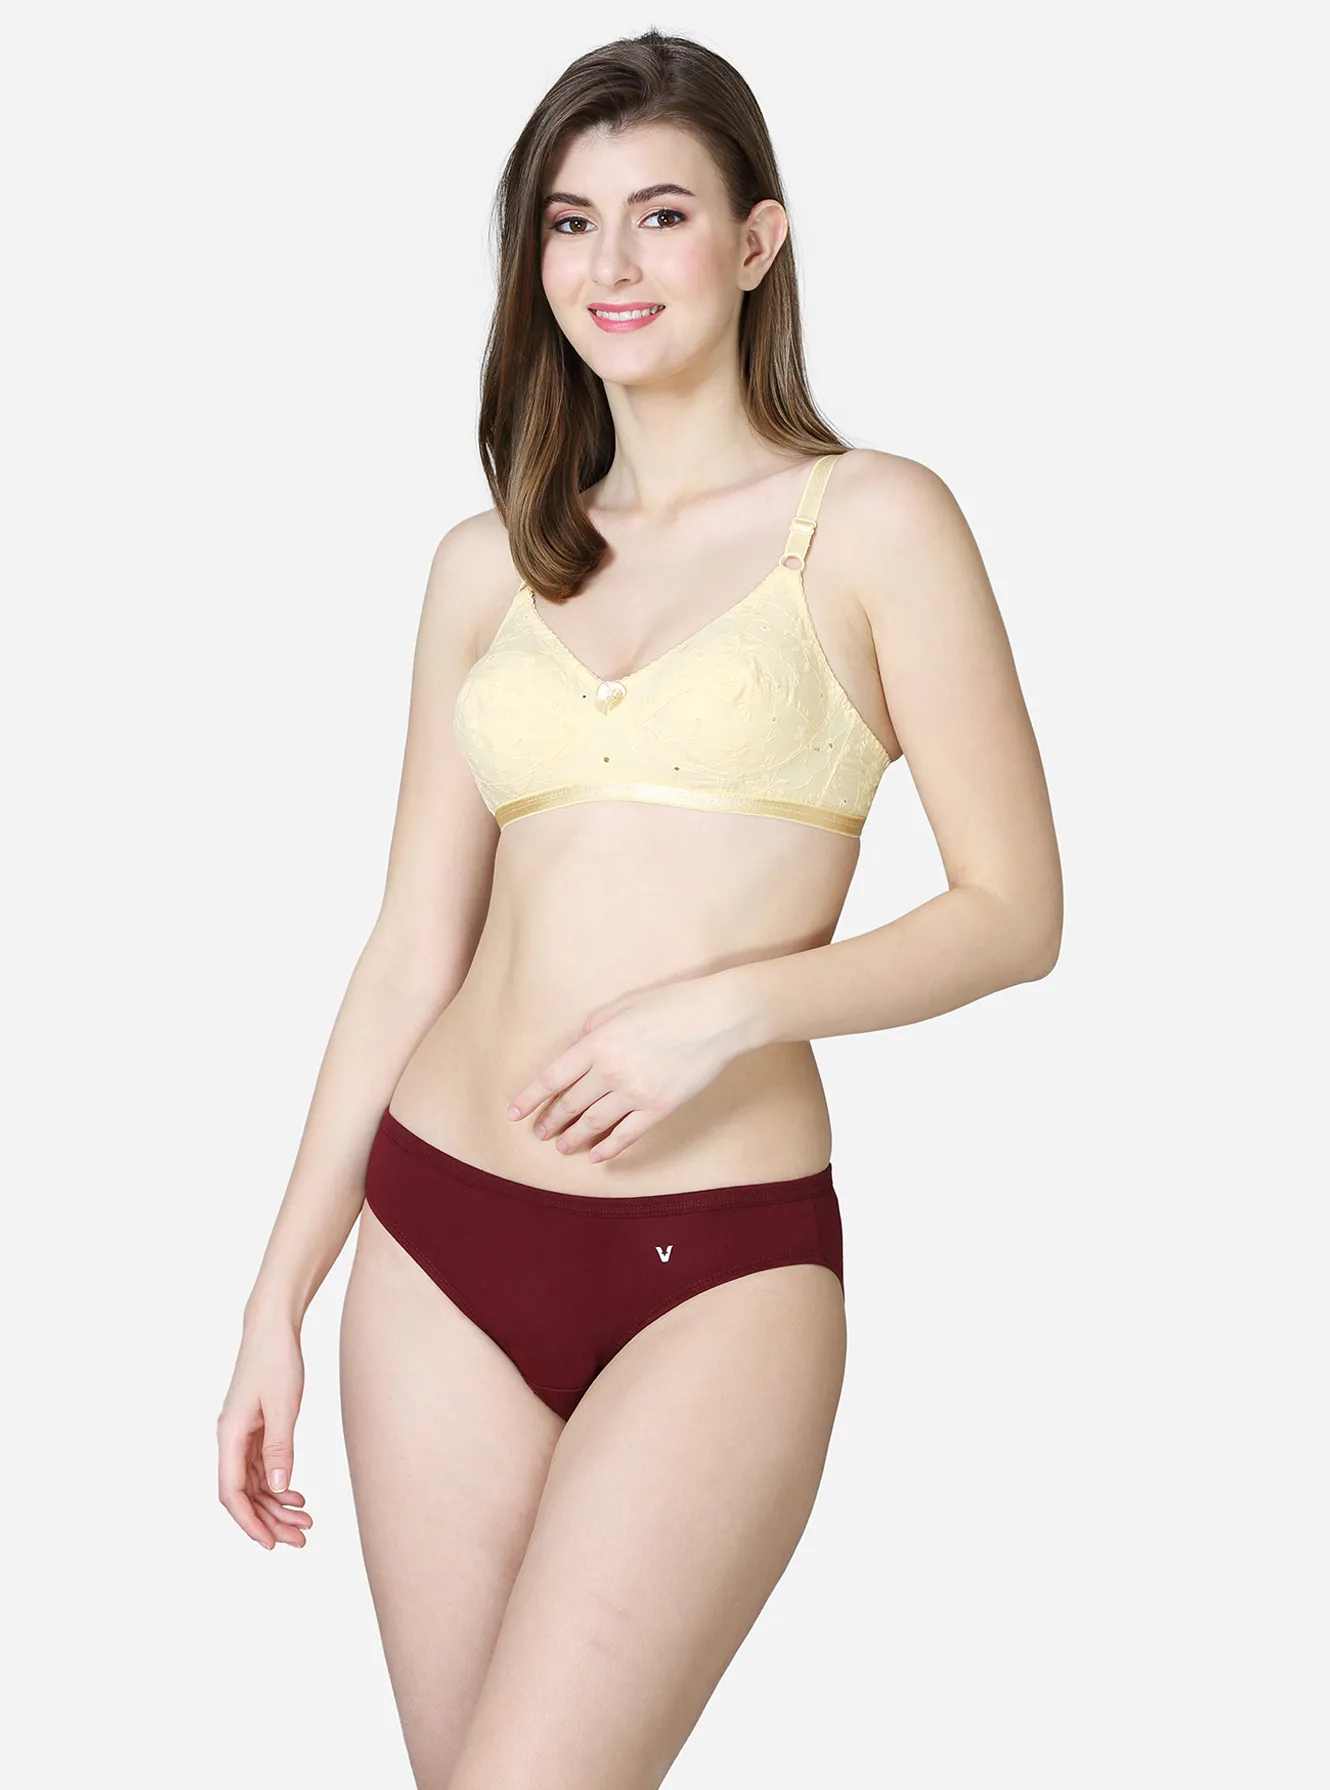 Low rise bikini style panty with concealed elastic waistband